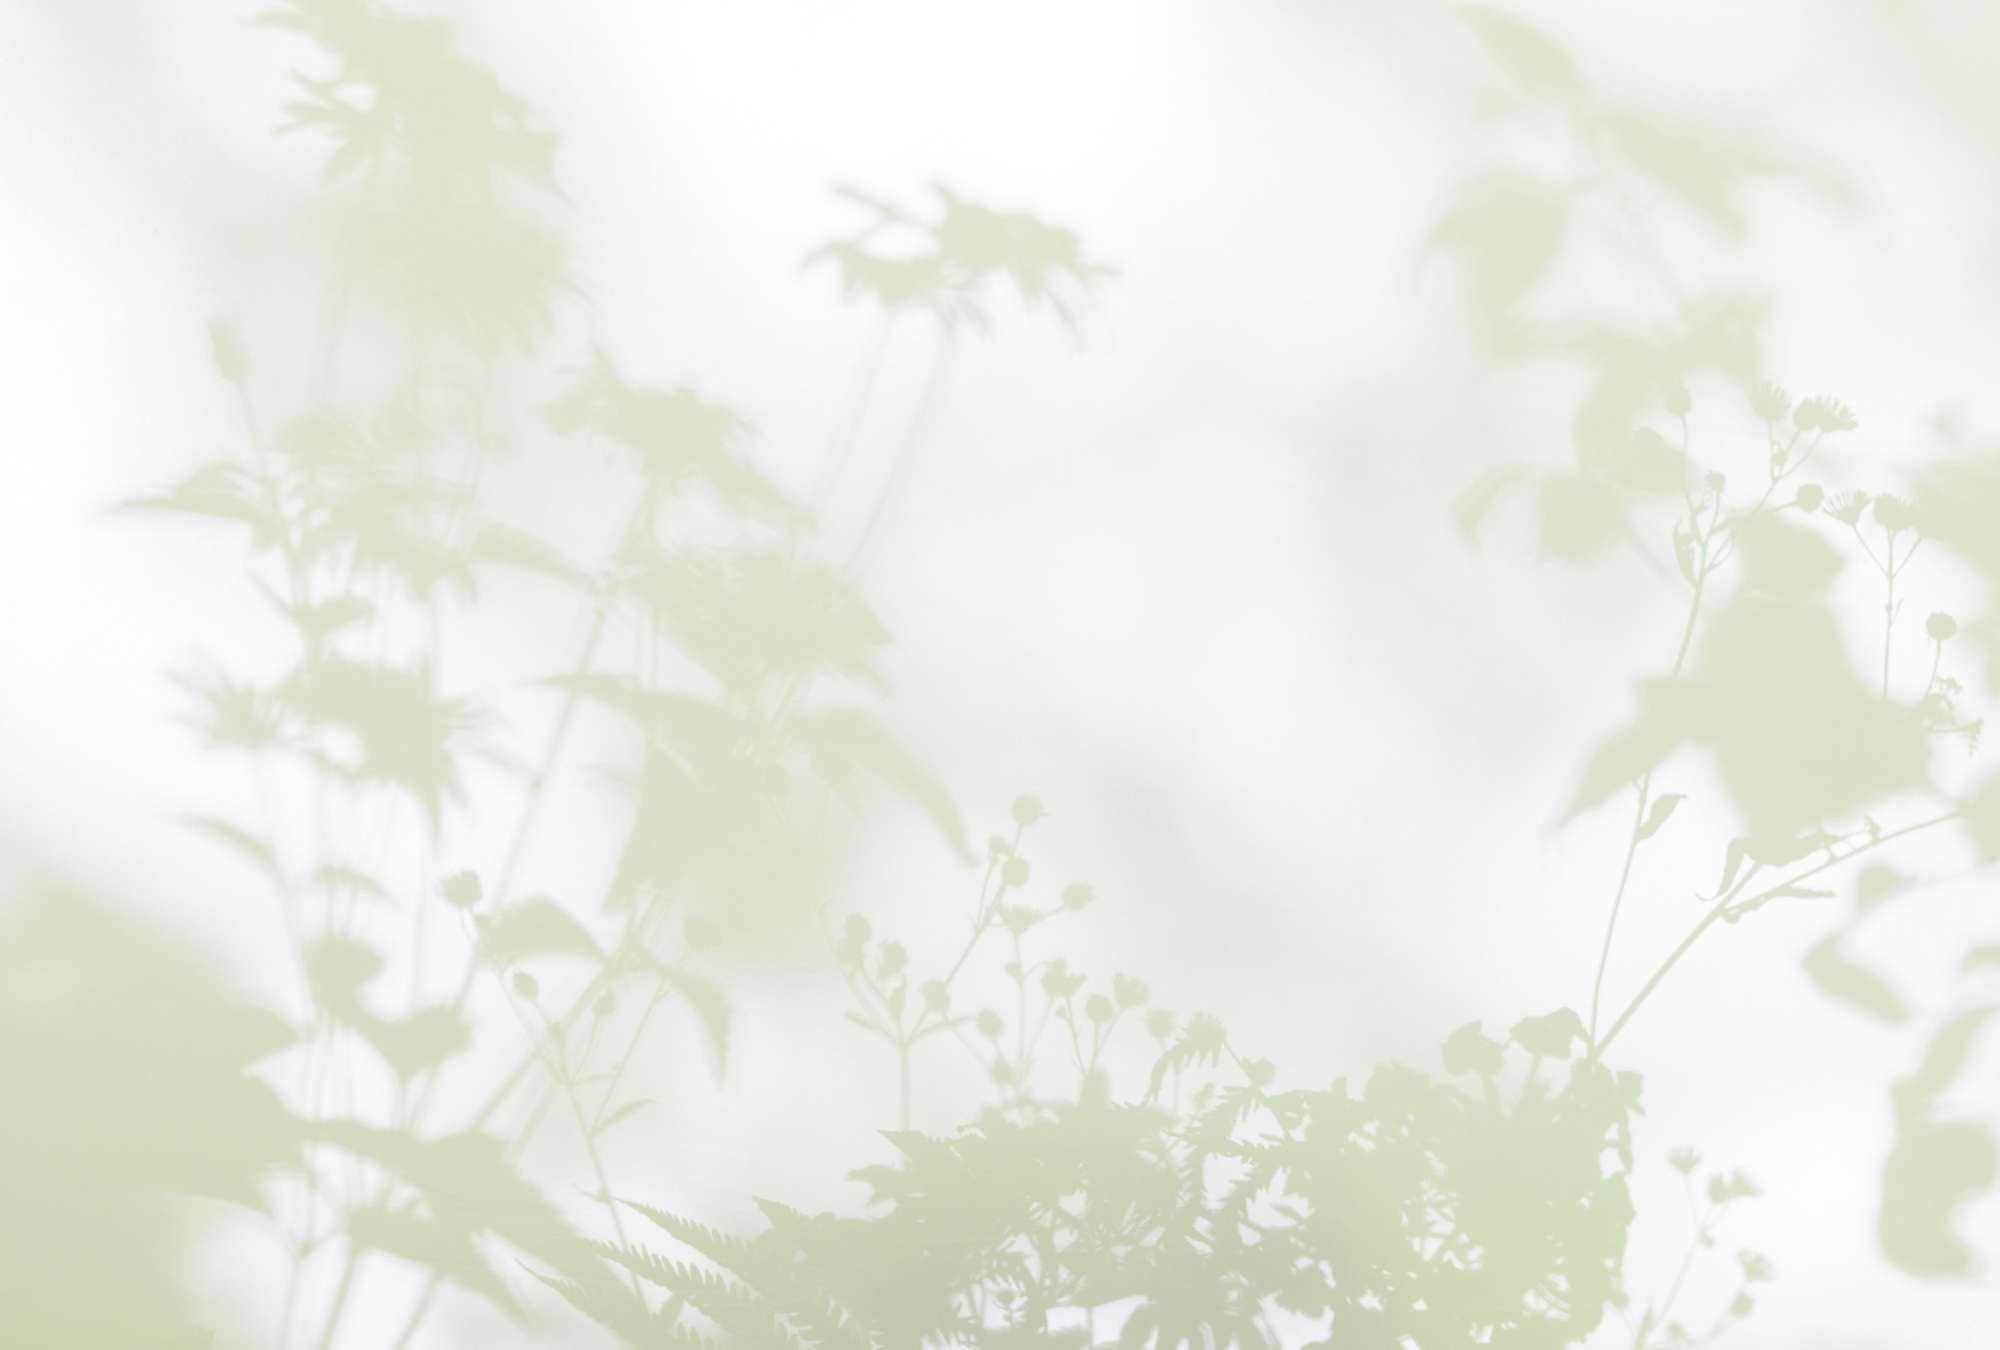             Shadow Room 3 - nature photo wallpaper green & white, faded design
        